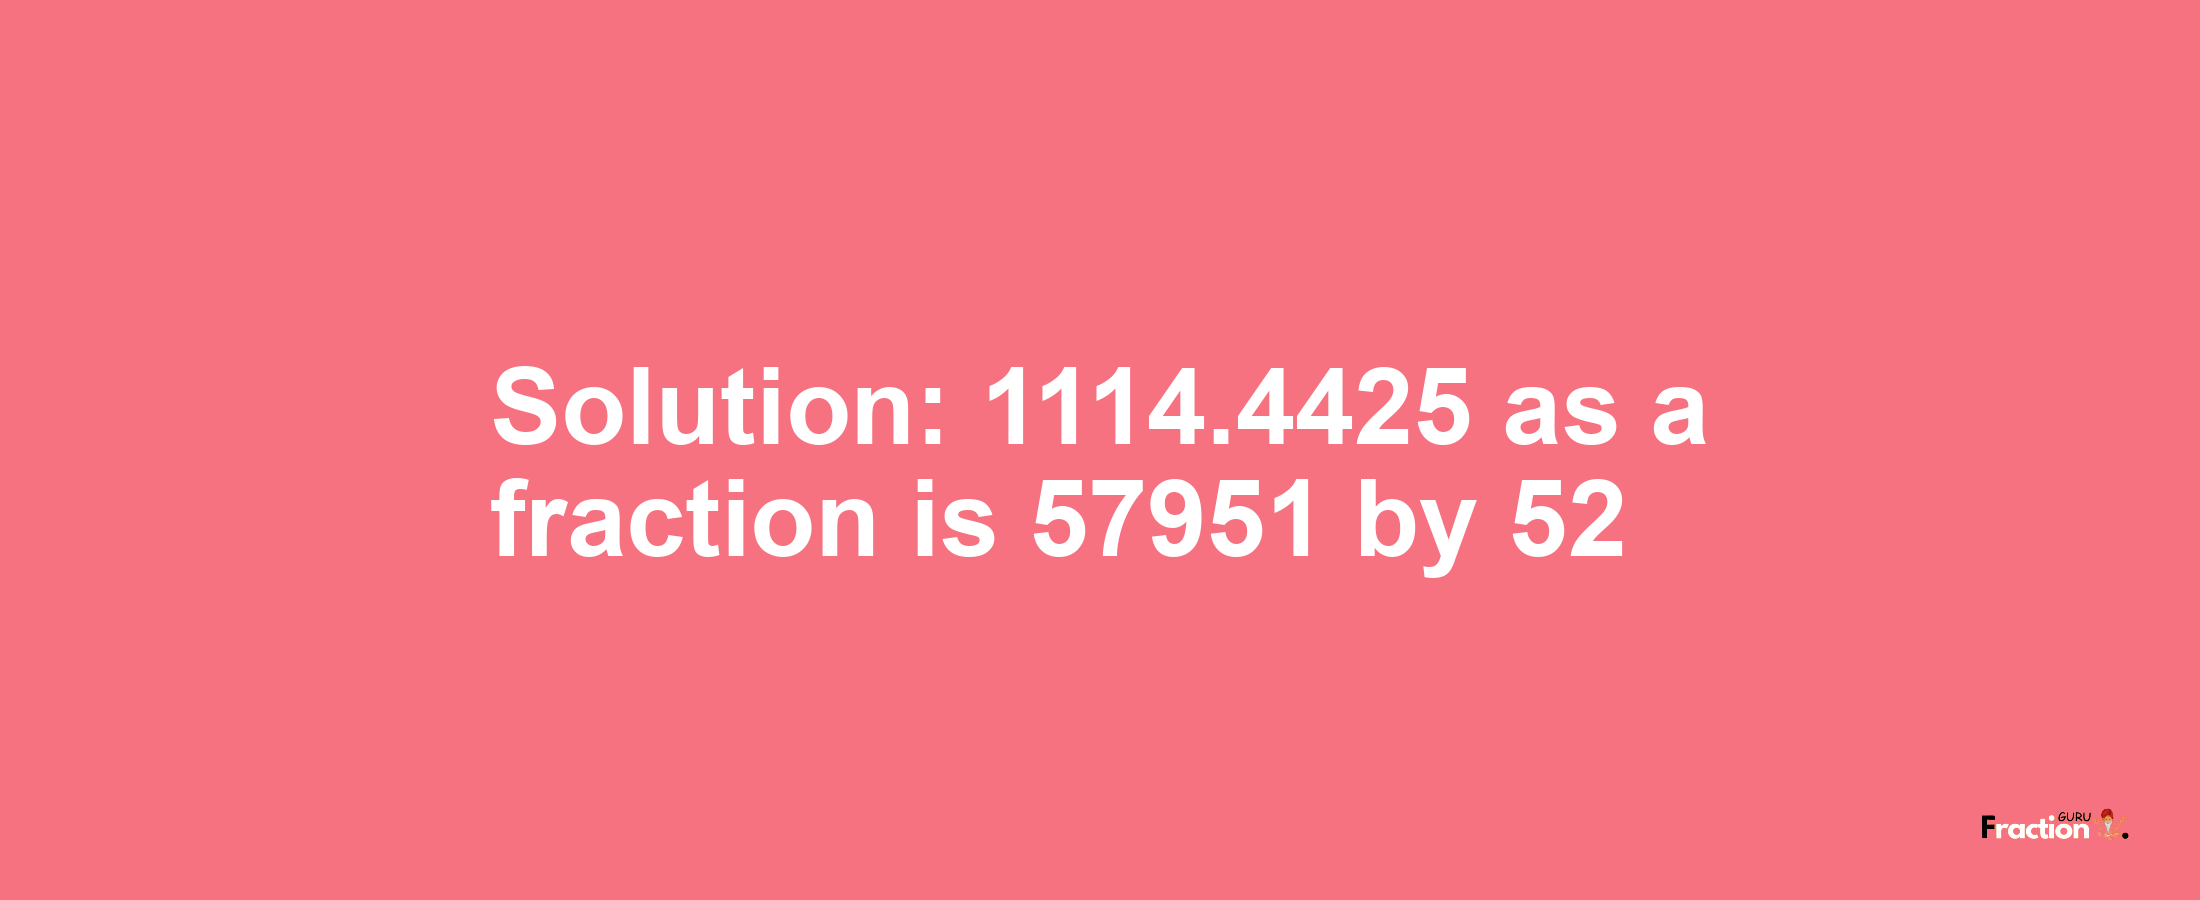 Solution:1114.4425 as a fraction is 57951/52